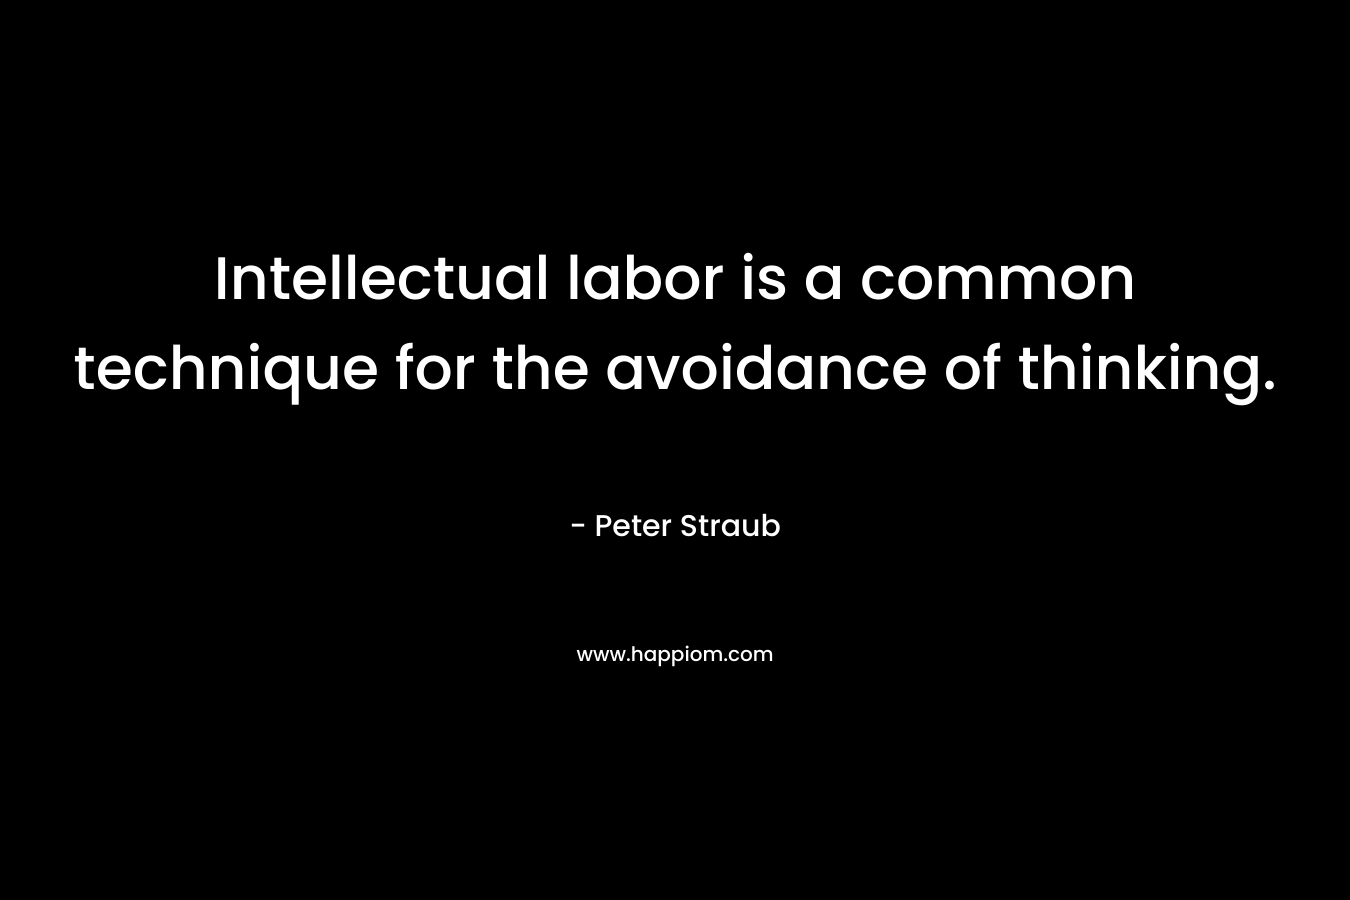 Intellectual labor is a common technique for the avoidance of thinking. – Peter Straub